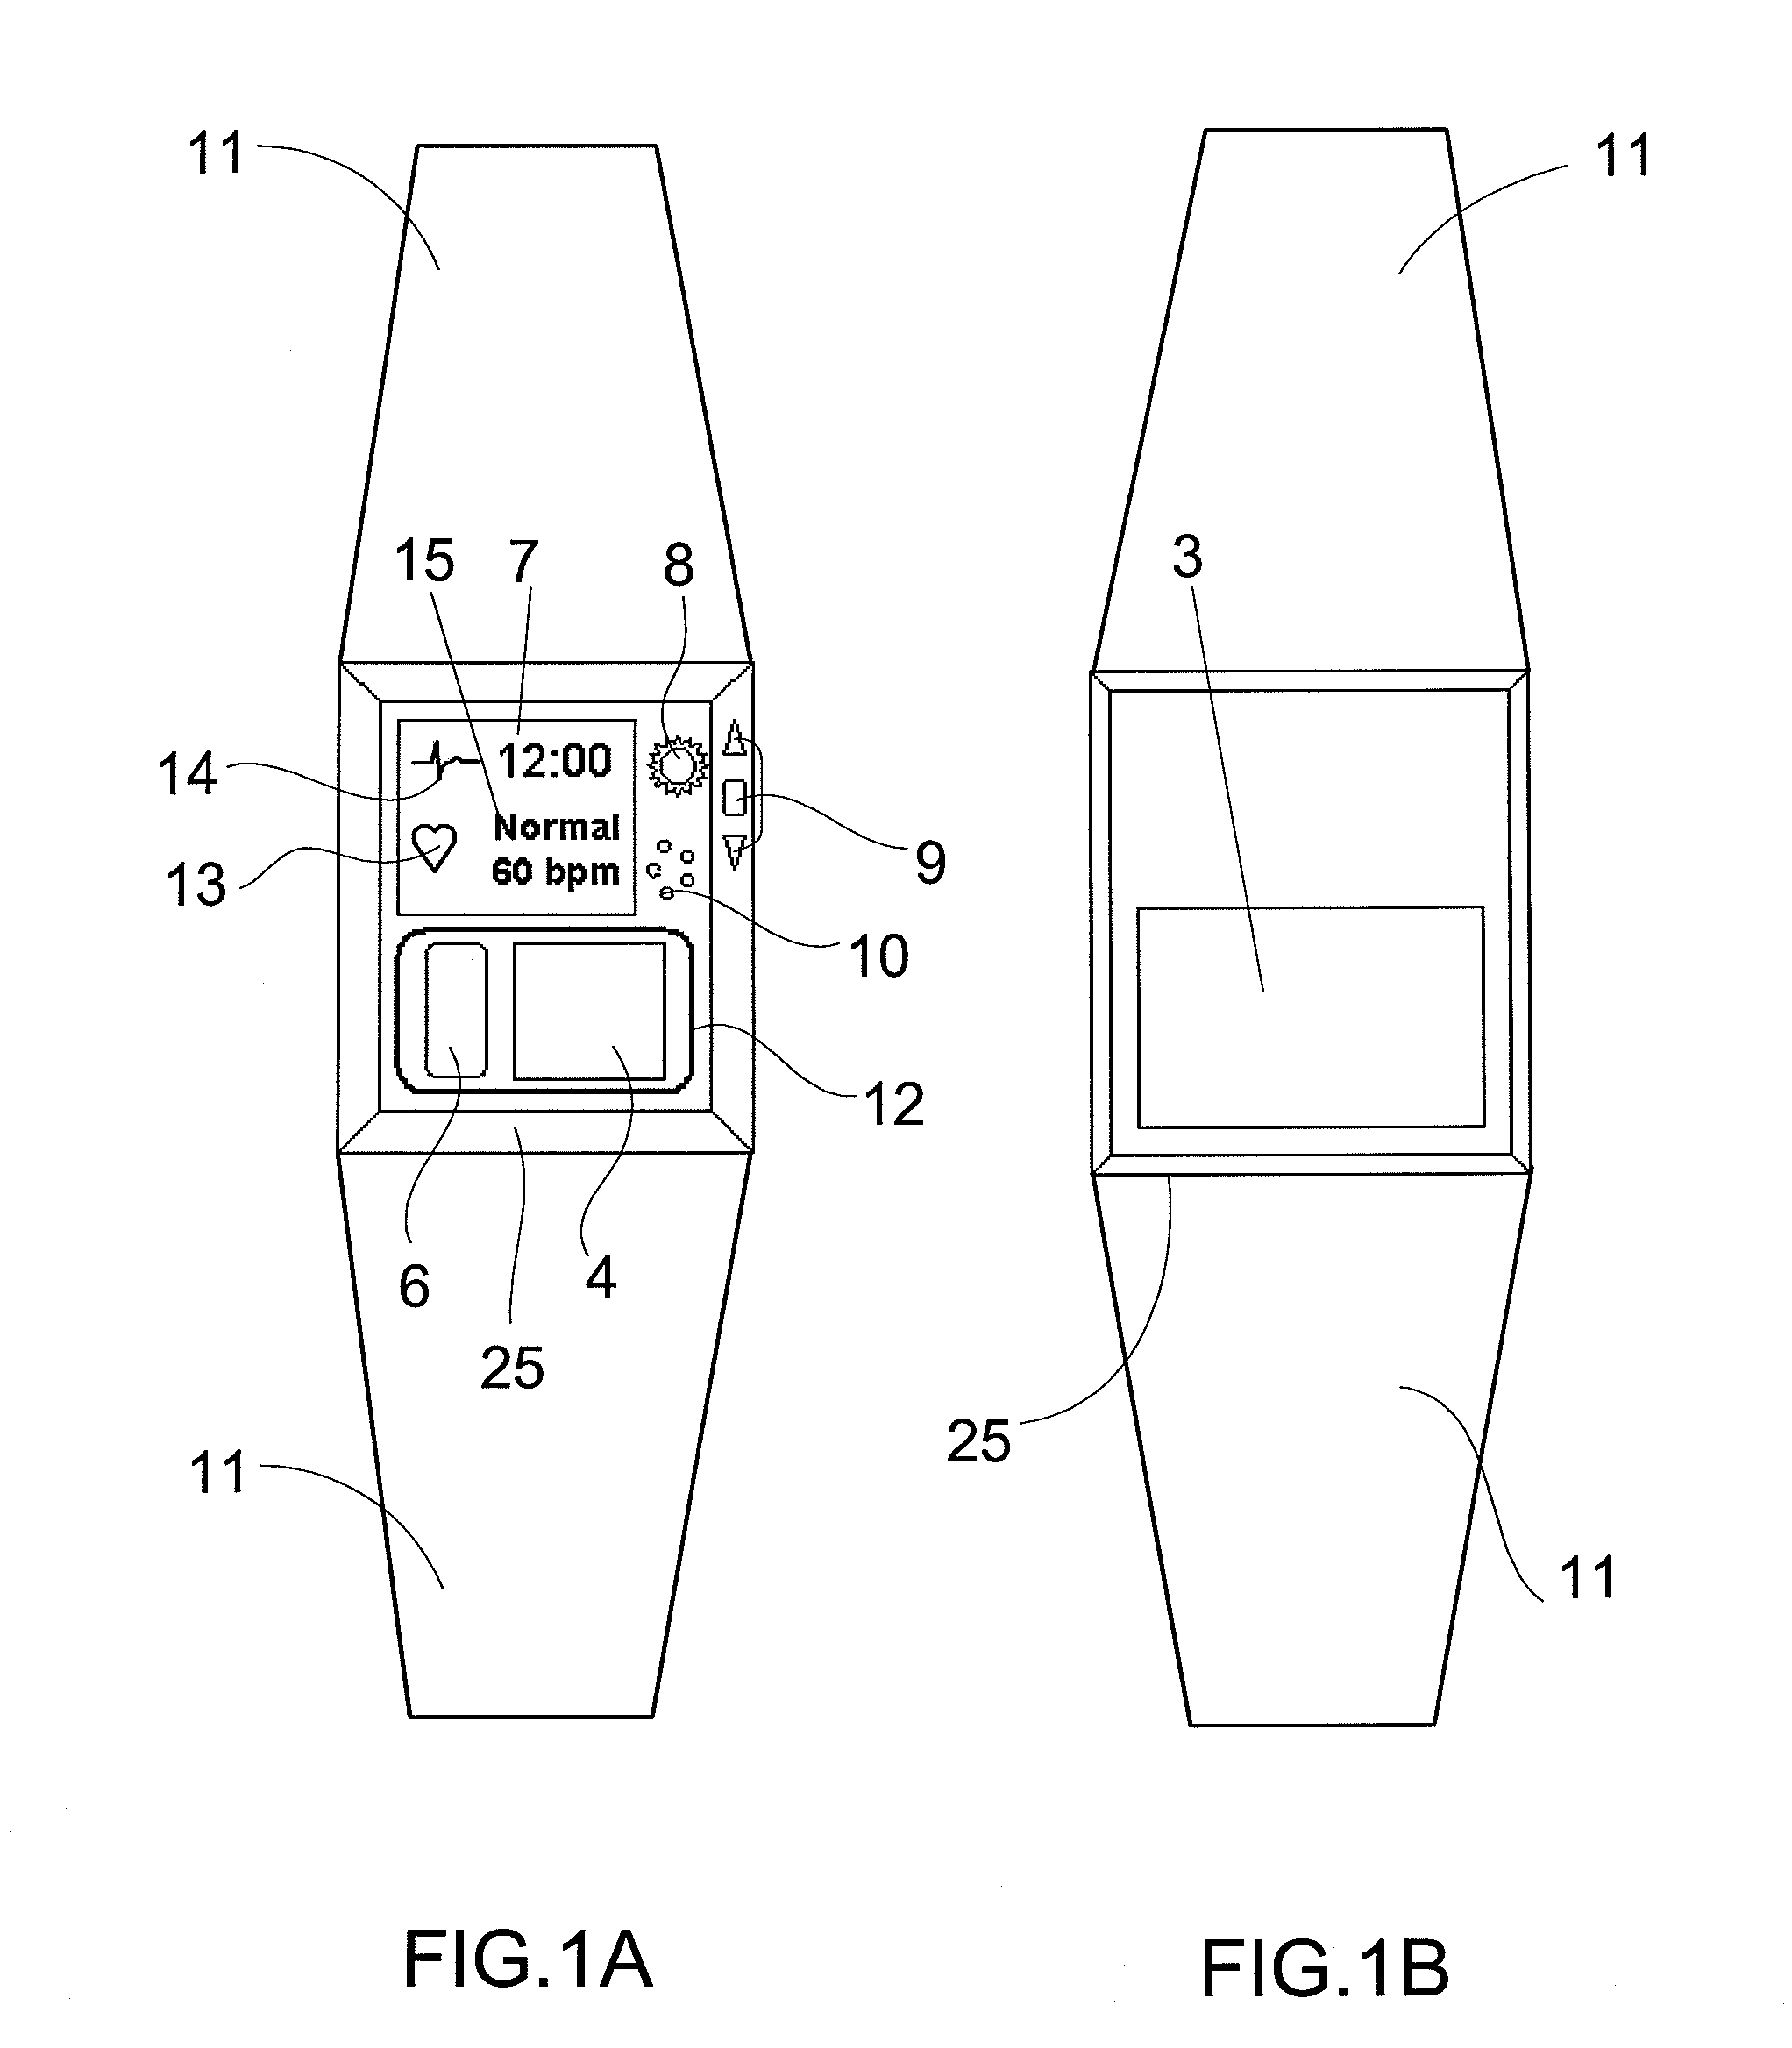 Device and Method for Measuring Three-Lead ECG in a Wristwatch